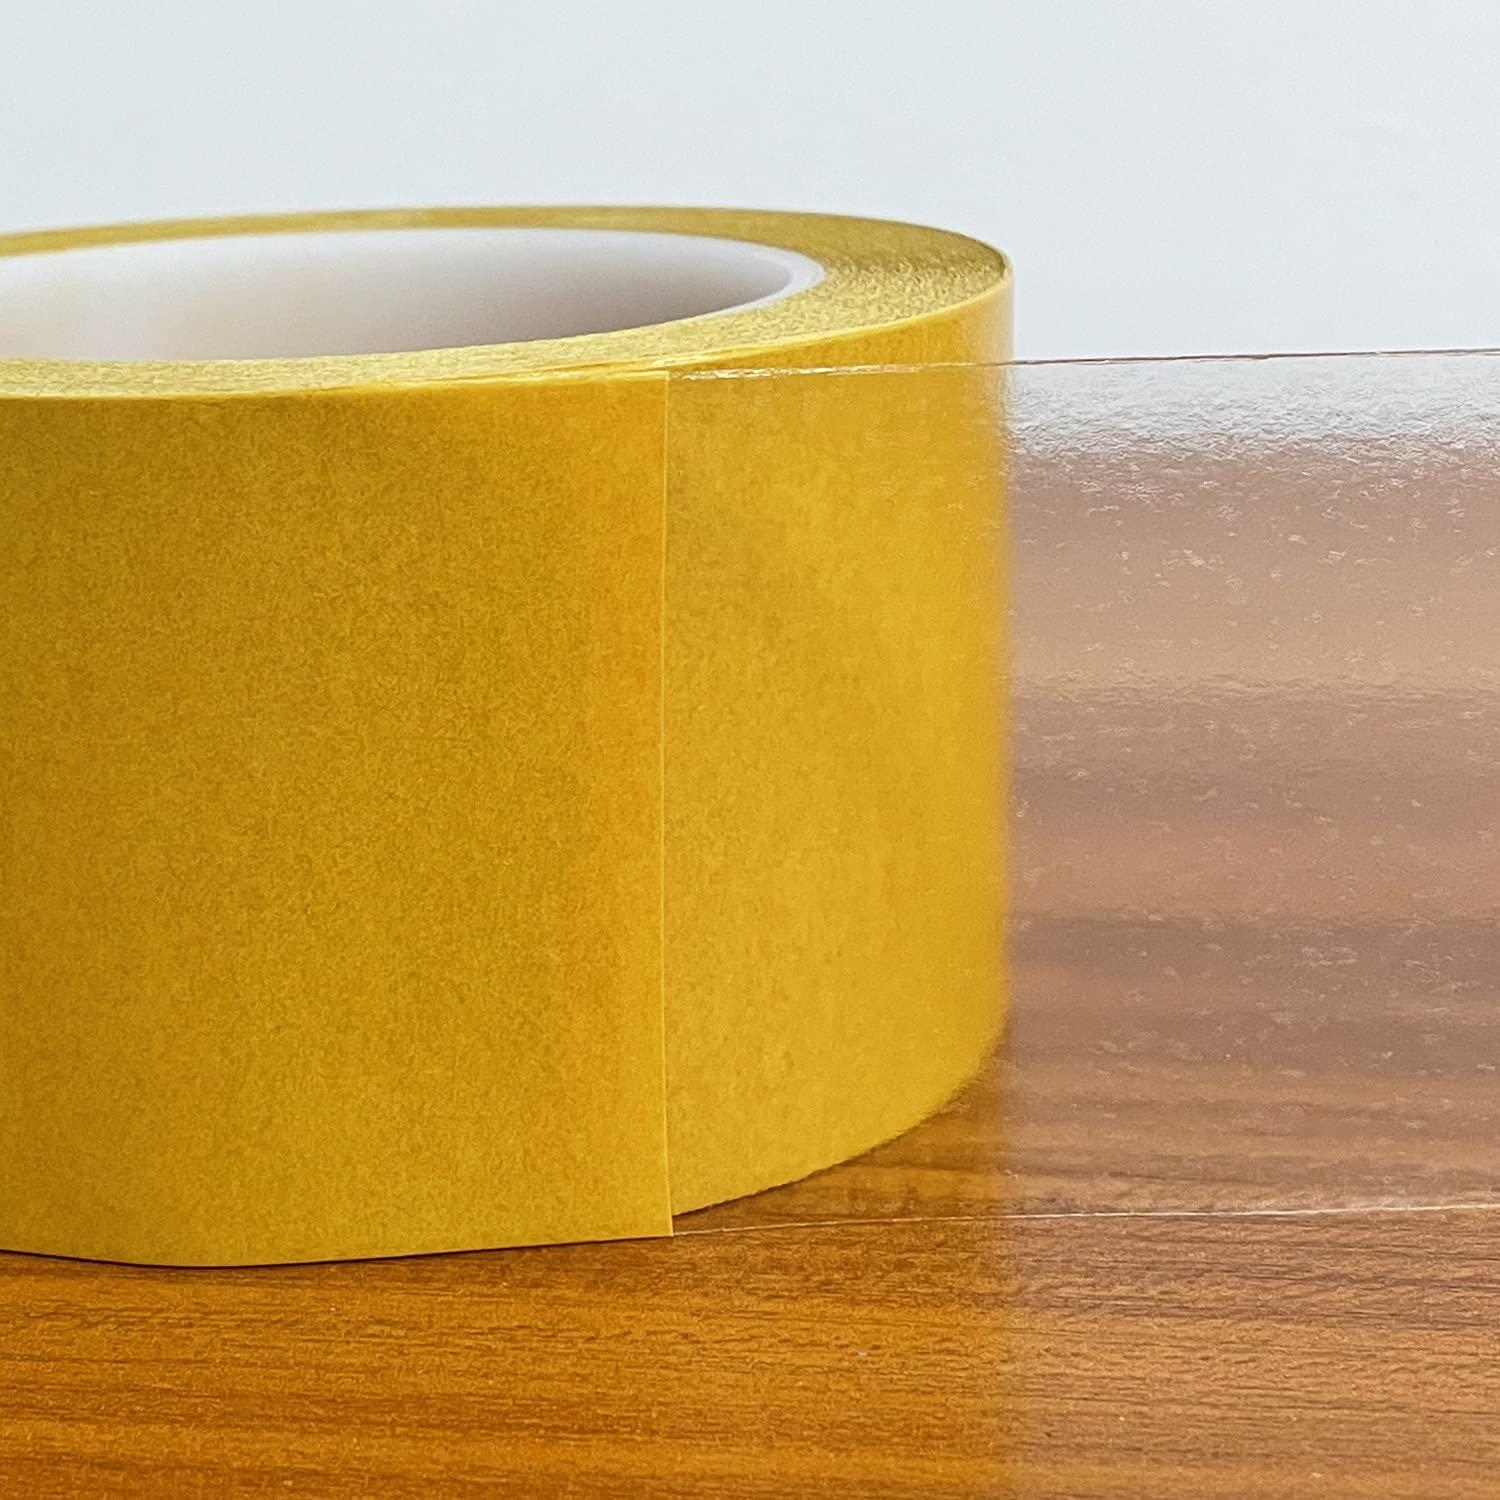 Extra thin double sided tape